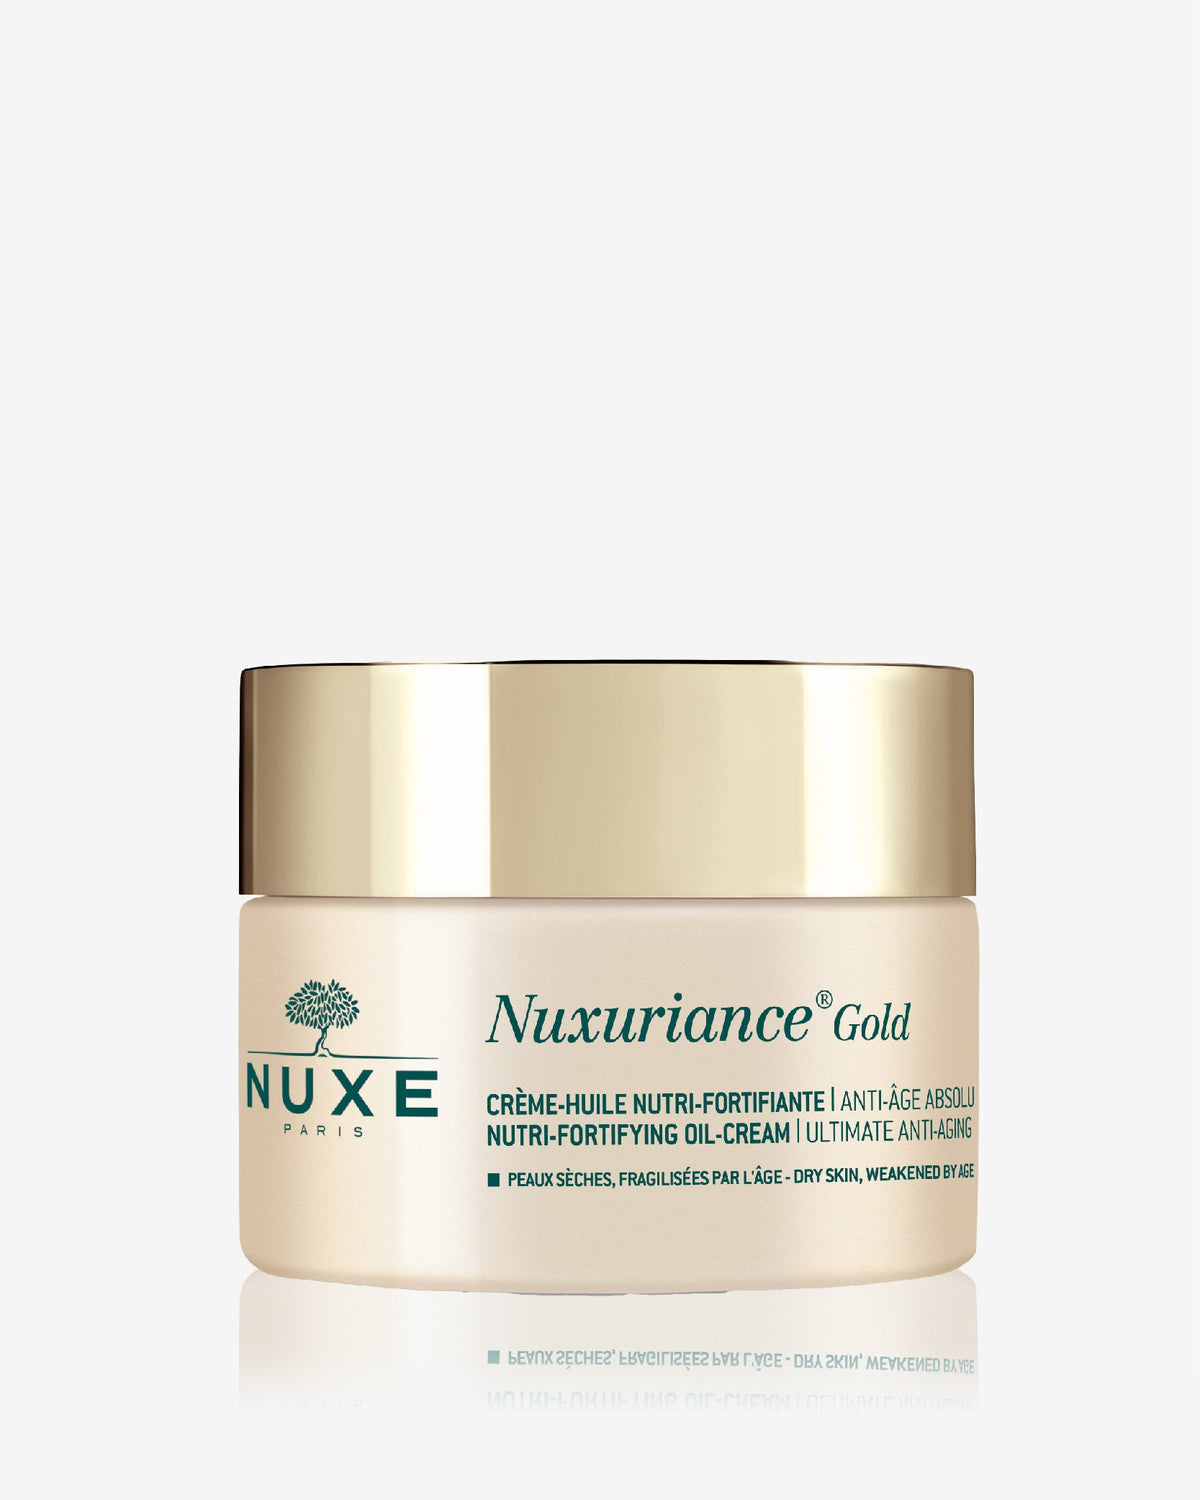 Nuxuriance® Gold Nutri-Fortifying Oil-Cream